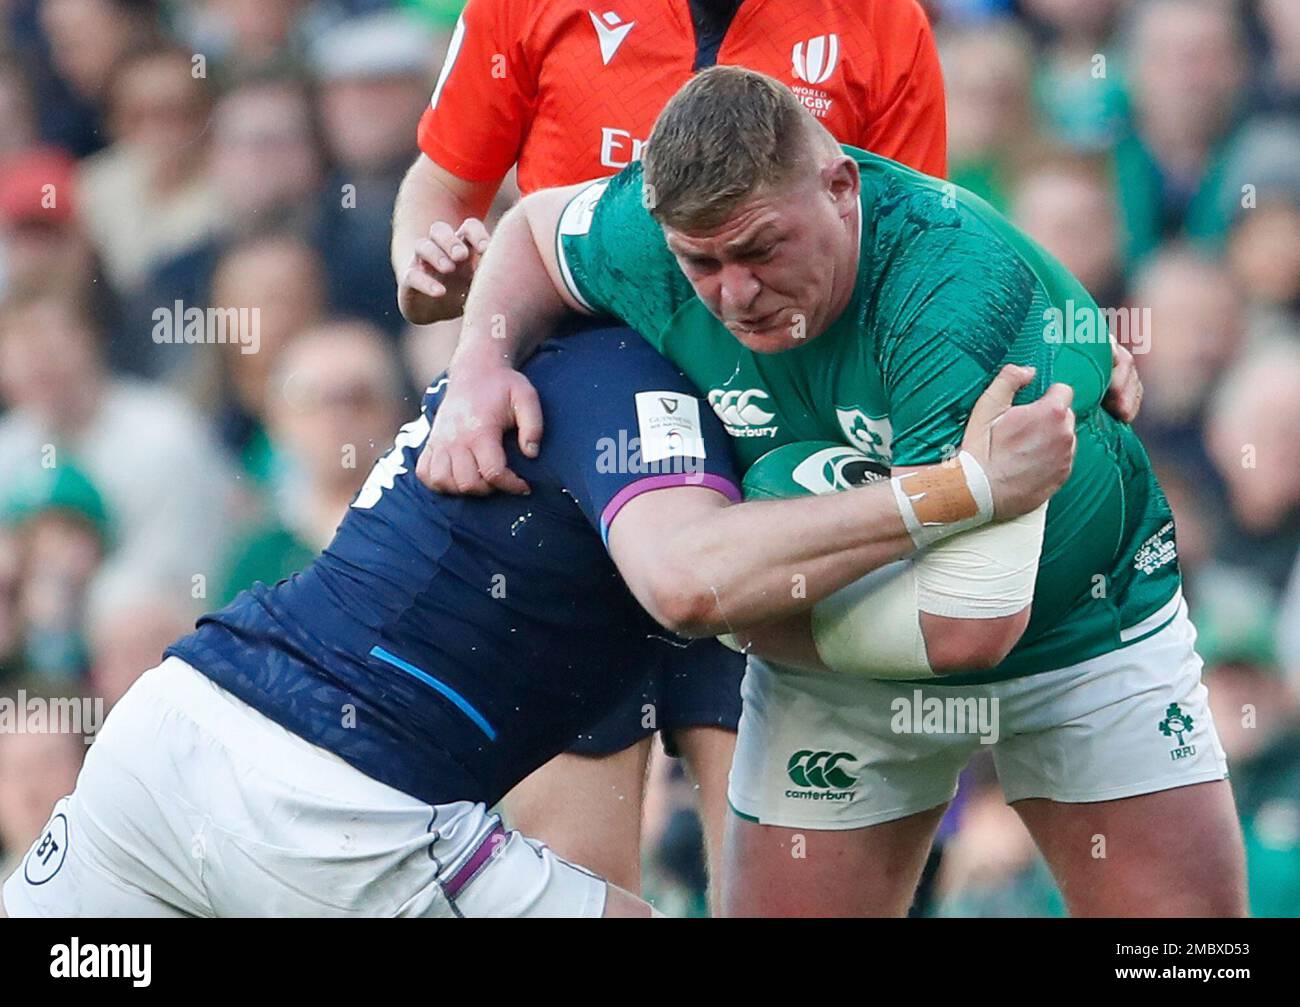 Ireland's Tadhg Furlong, right is tackled by Scotland's Jonny Gray during  the Six Nations rugby union international match between Ireland and  Scotland at the Aviva Stadium in Dublin, Ireland. (AP Photo/Peter Morrison